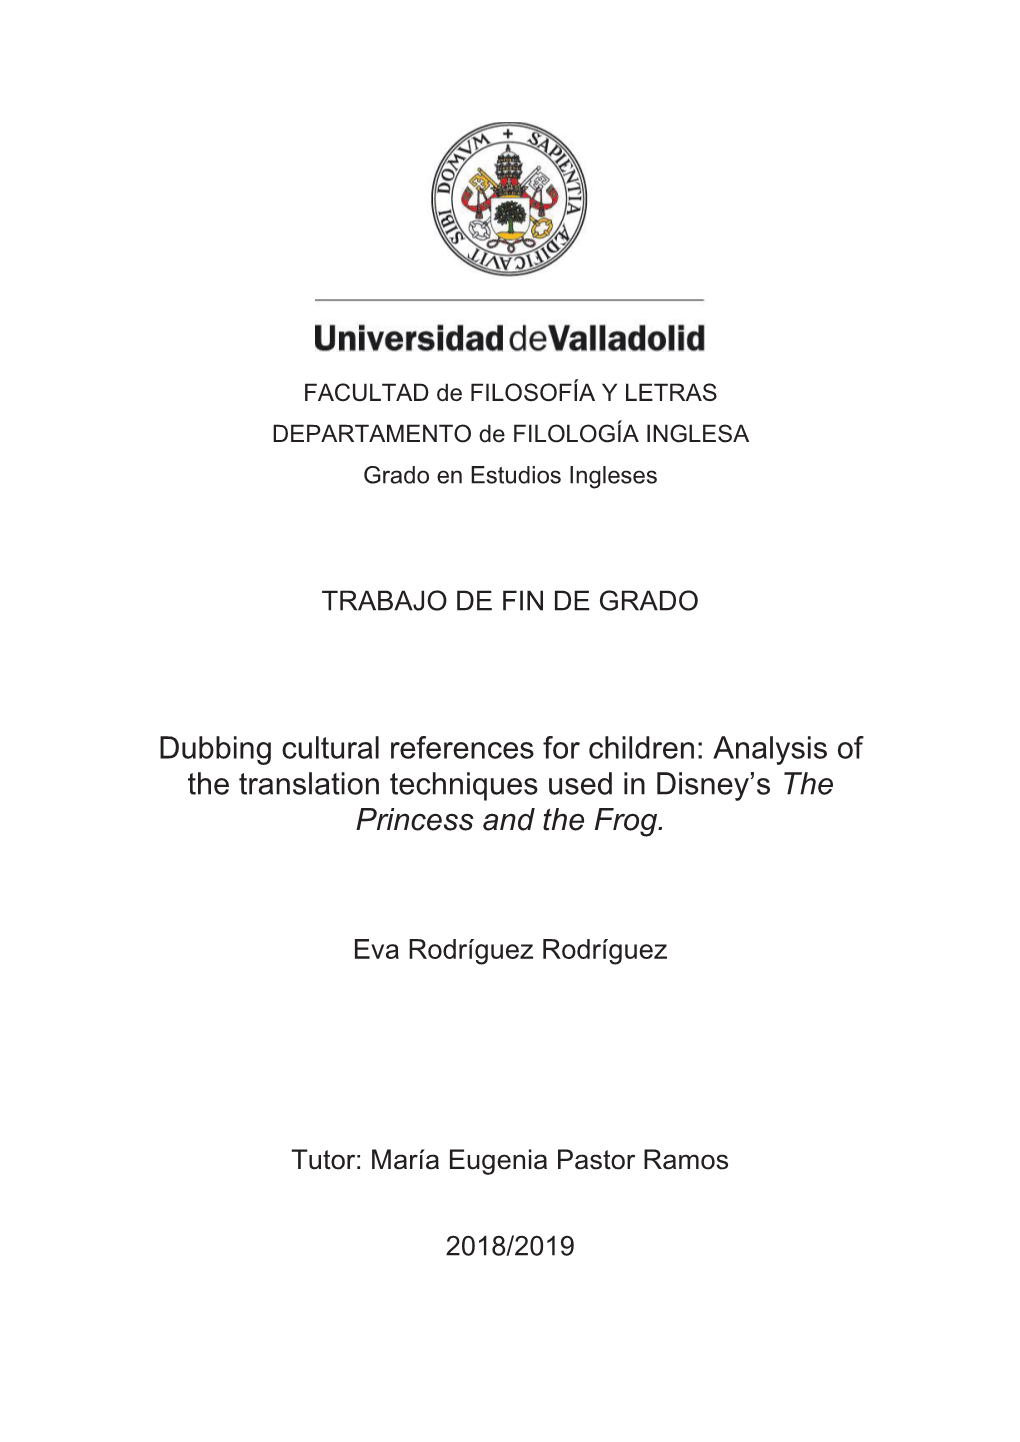 Dubbing Cultural References for Children: Analysis of the Translation Techniques Used in Disney’S the Princess and the Frog